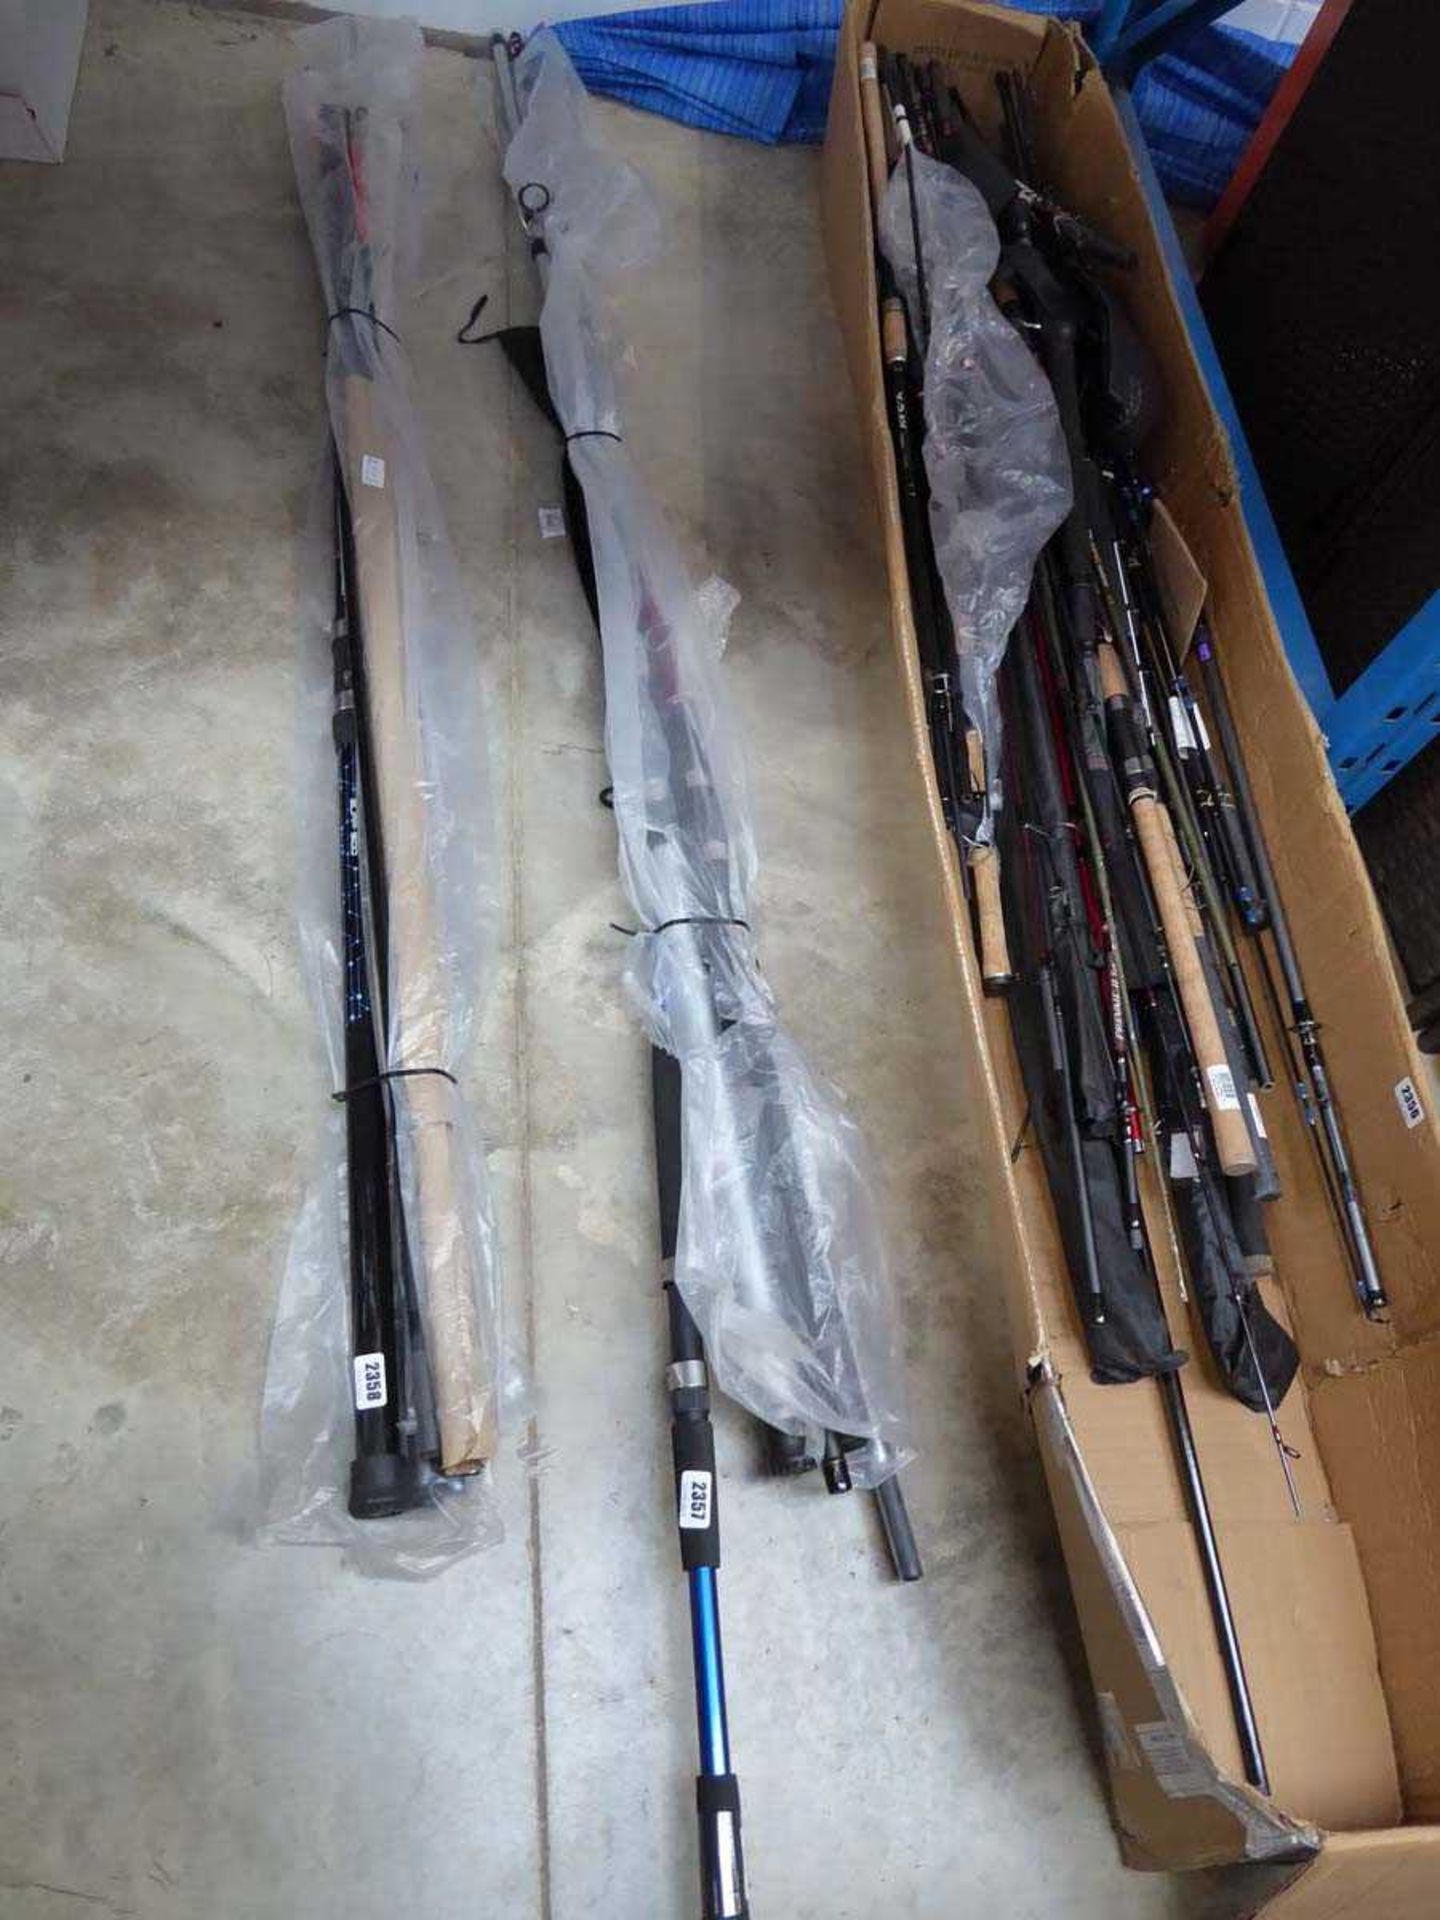 Bundle of mixed branded fishing rods